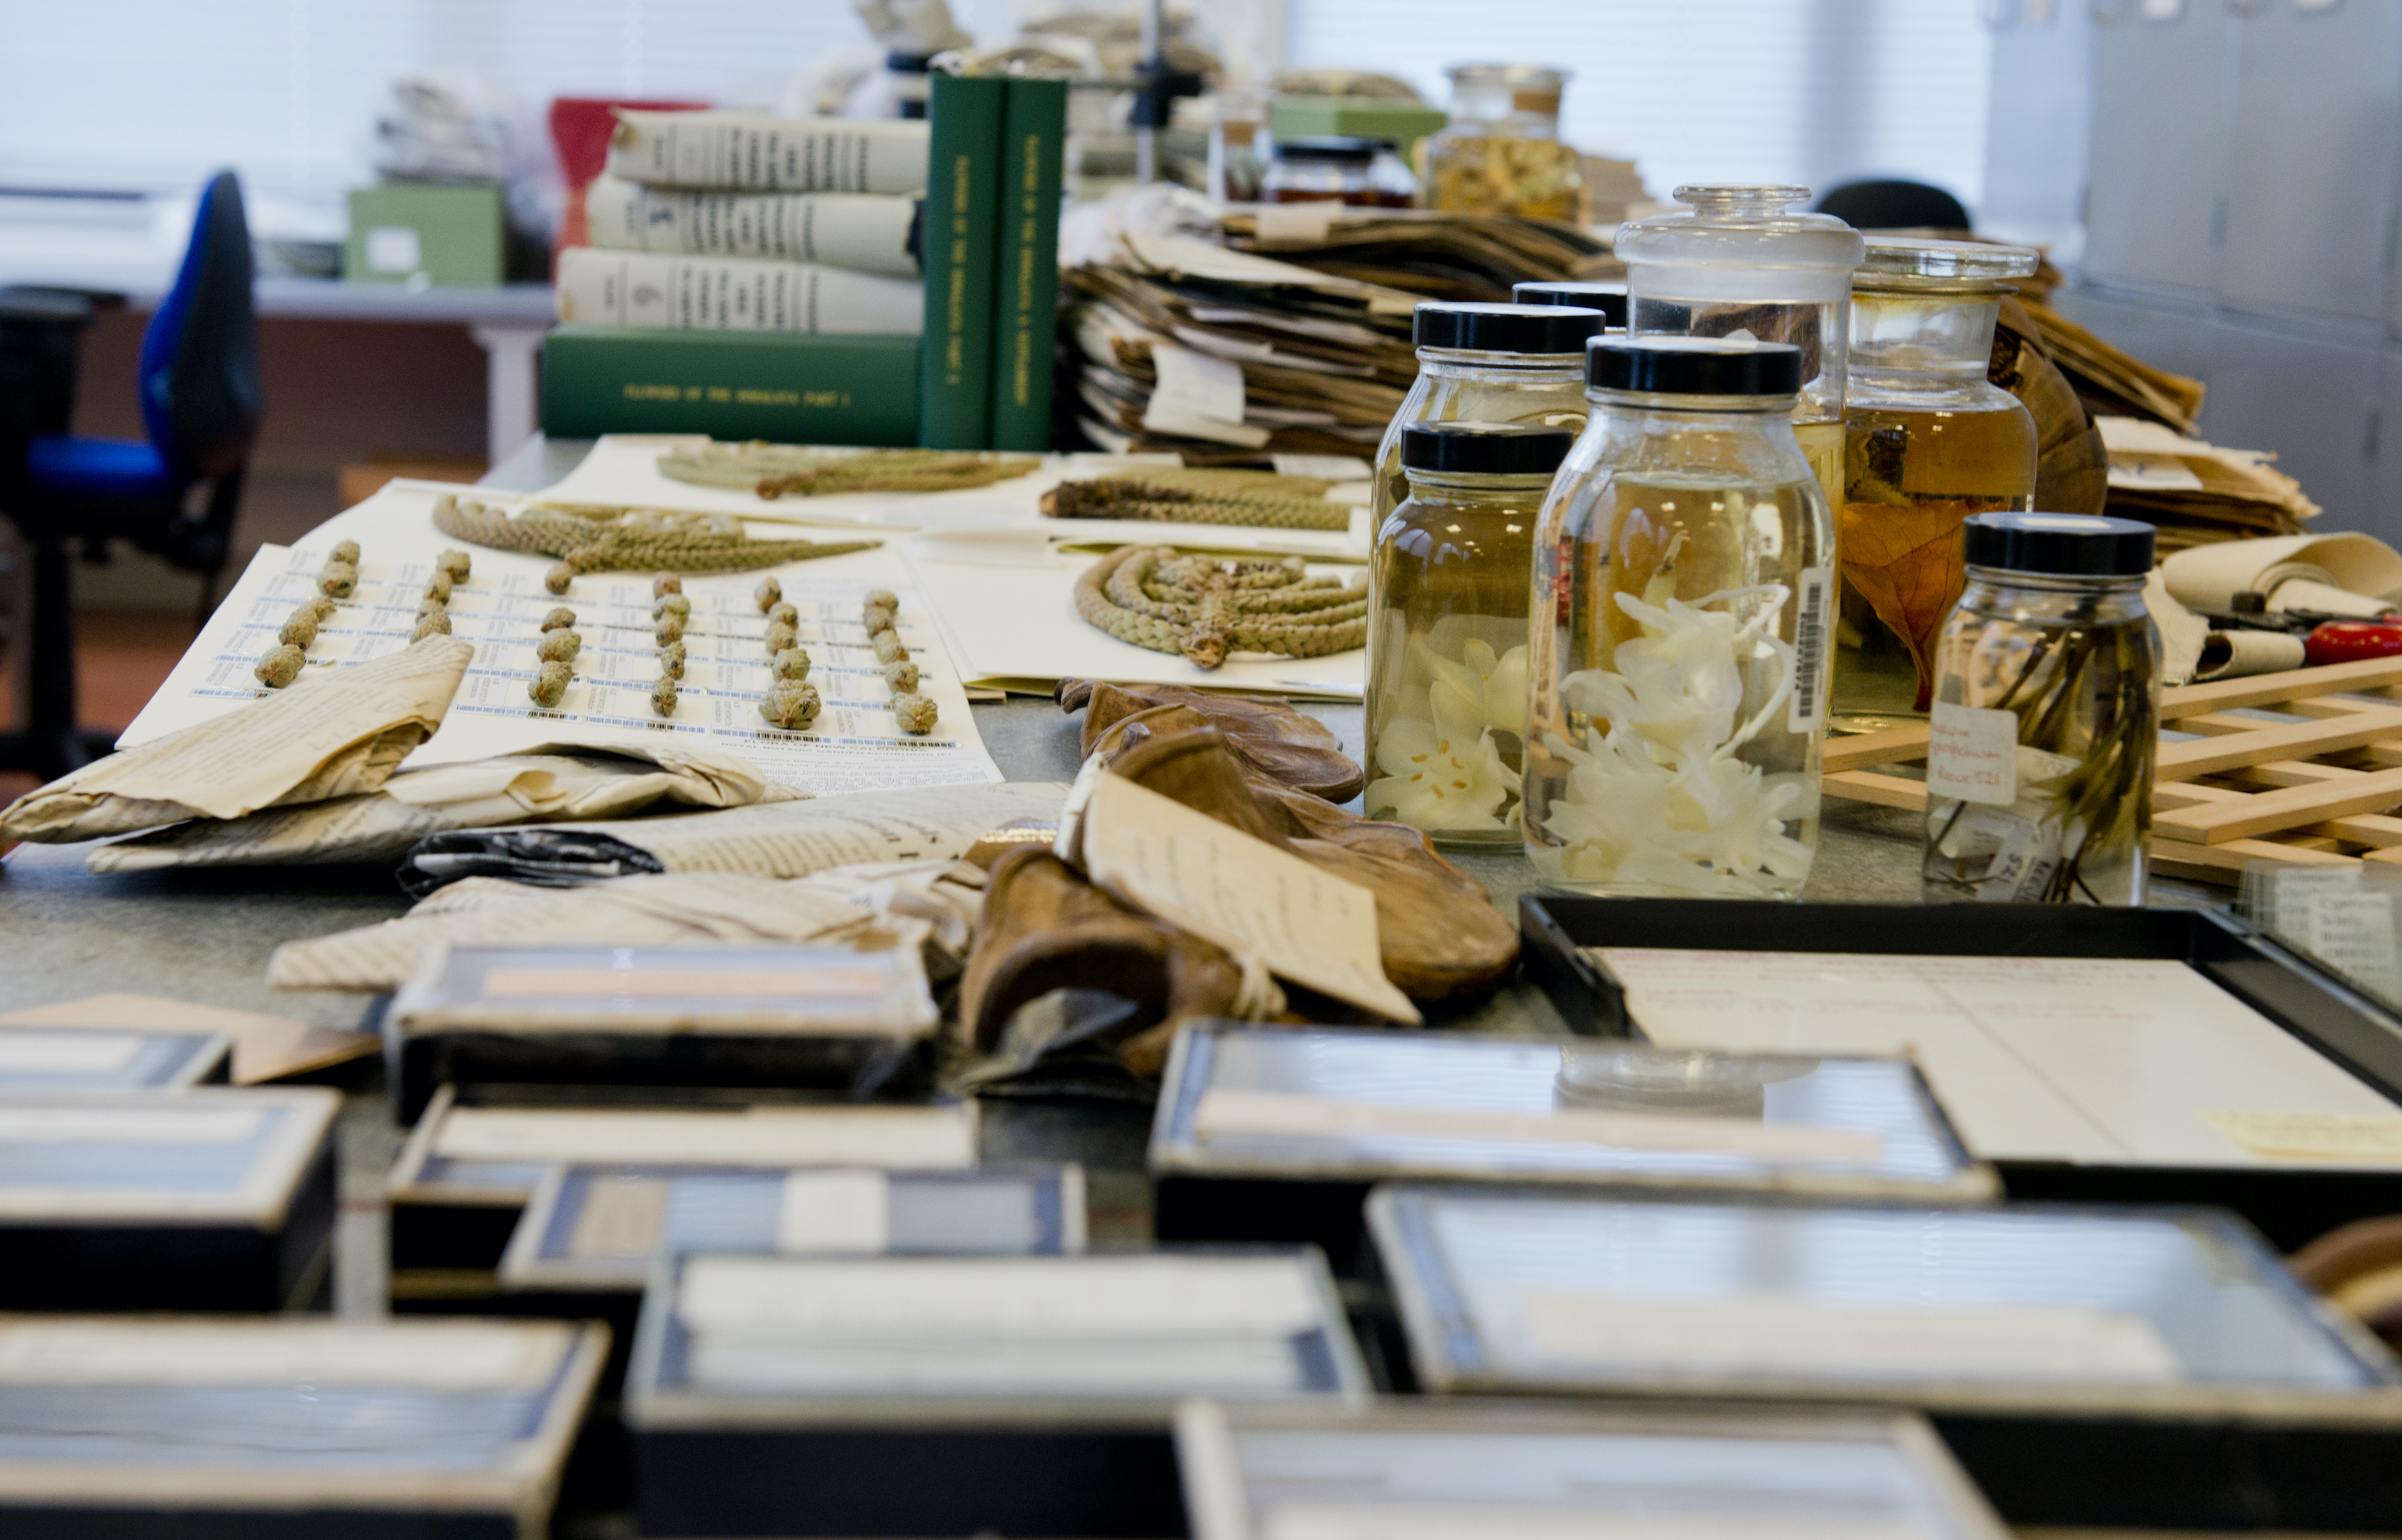 Close up view of a table laden with objects, taken from table height. In the foreground are boxes. Behind them, botanical samples are spread out on the table, some mounted on paper, others in jars. At the back are books and a pile of folders.